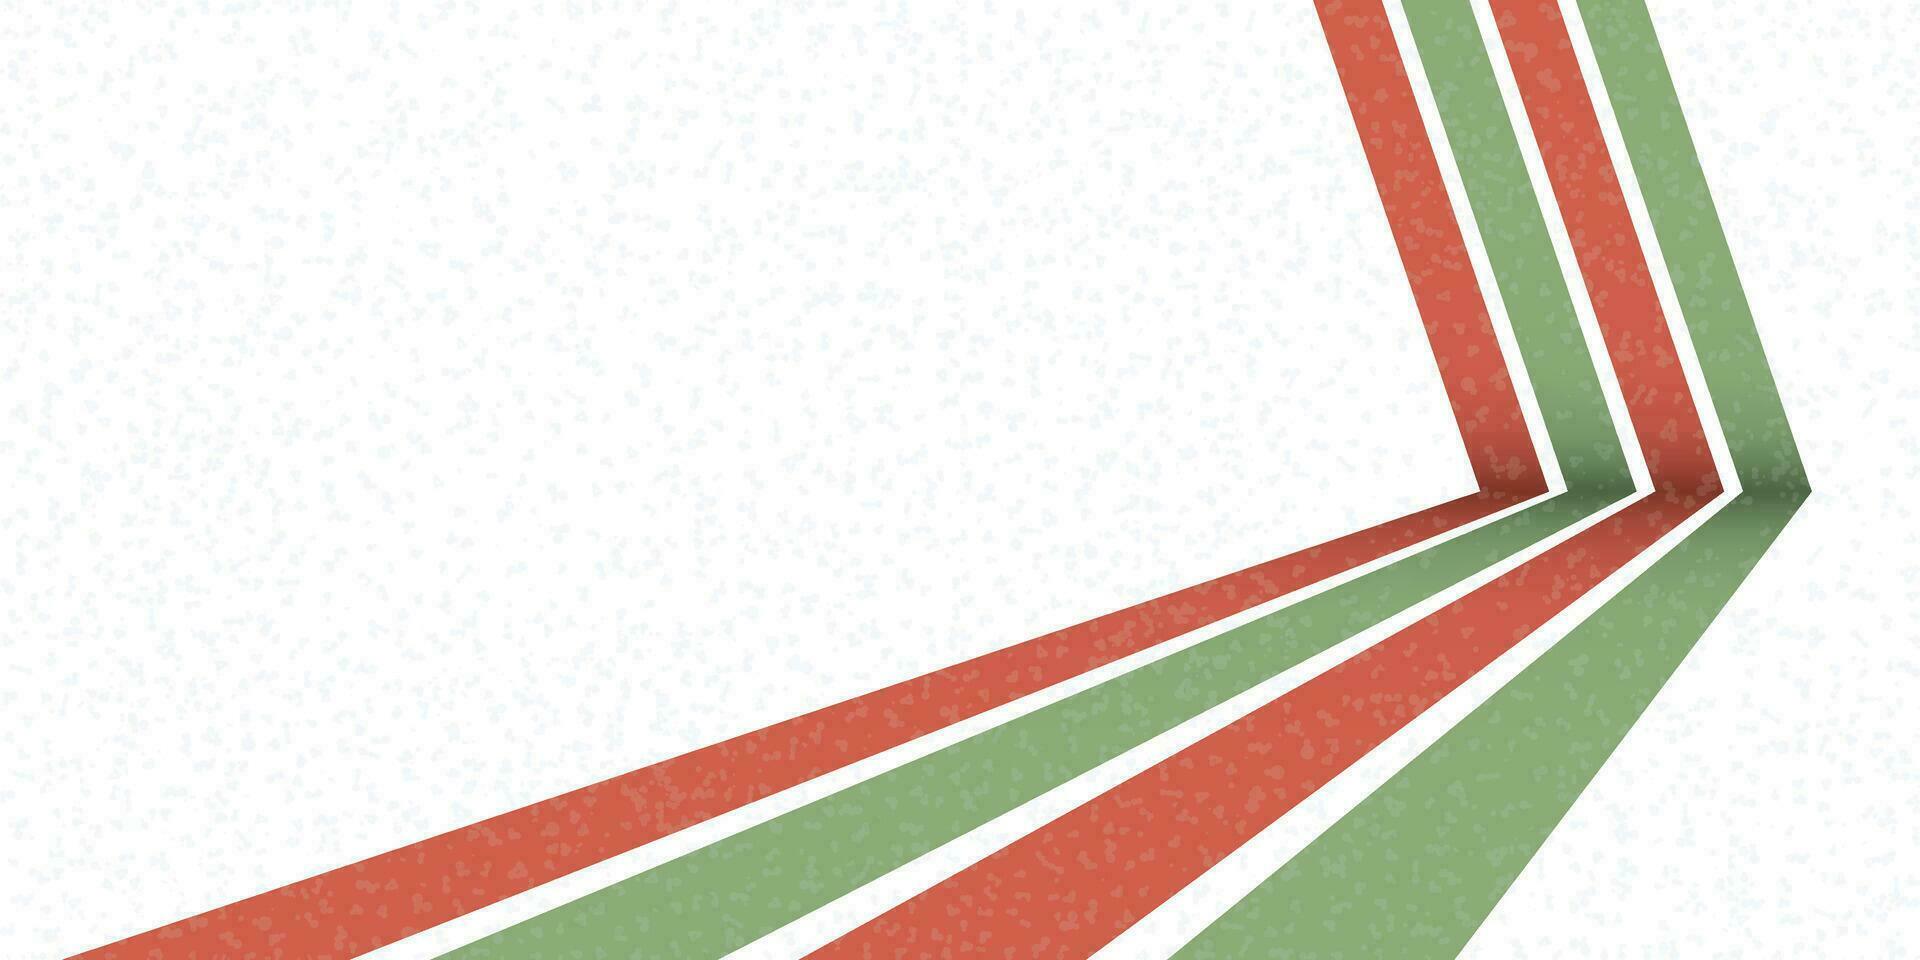 Abstract Christmas concept 1970's style red and green stripes on white background with risograph printing effect have blank space. Merry Xmas and Happy New Year vector illustration greeting card.